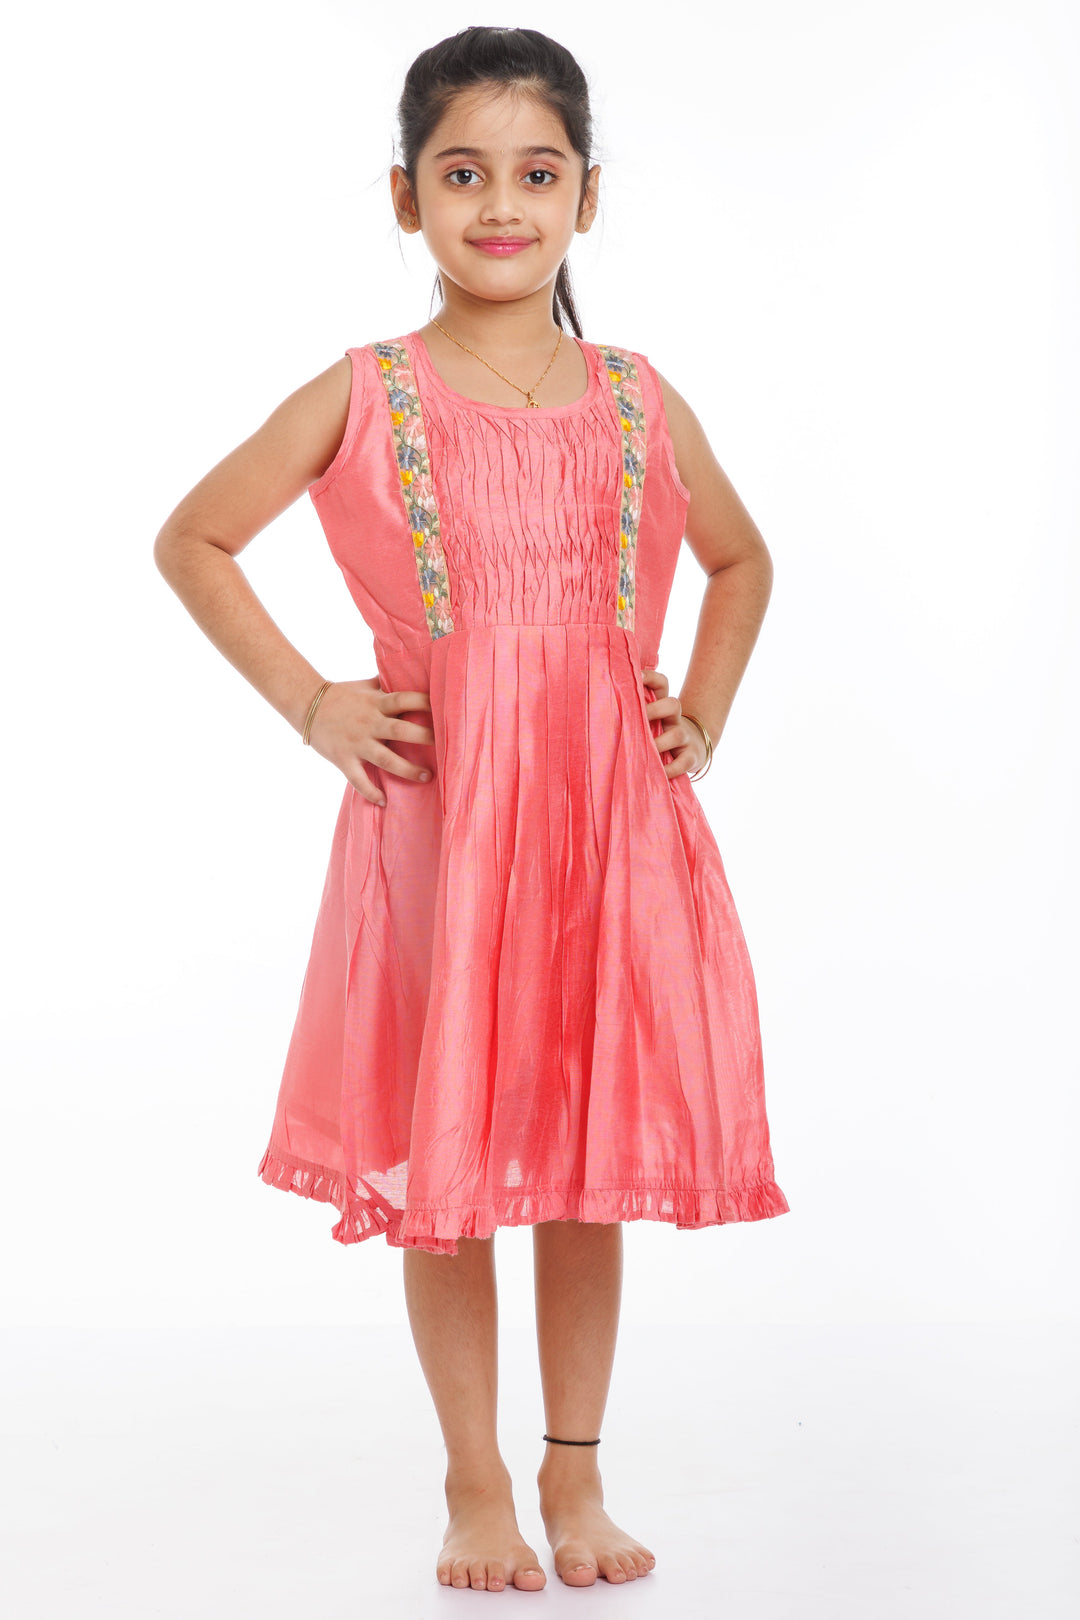 The Nesavu Girls Cotton Frock Girls Pleated Summer Cotton Frock with Lace Detailing - Casual Chic Nesavu 16 (1Y) / Pink / Cotton GFC1261A-16 Chic Lace-Detailed Cotton Frock for Girls | Must-Have Summer Collection | The Nesavu